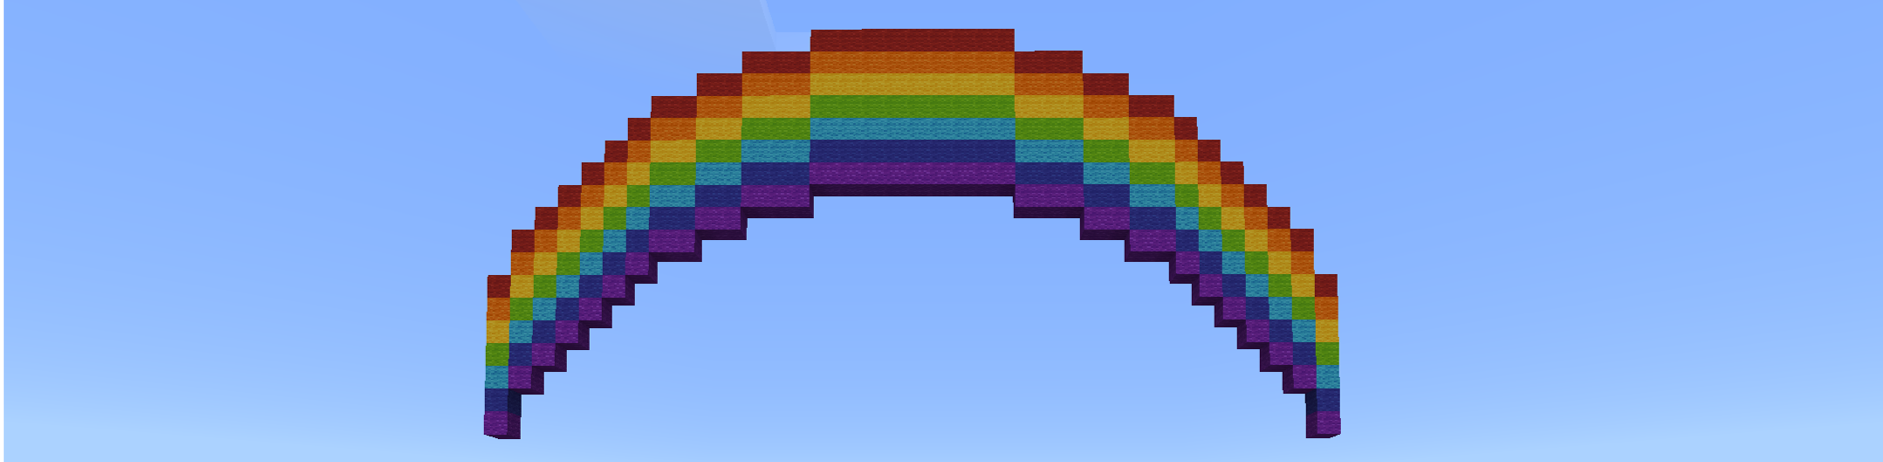 Minecraft Coding Code A Rainbow Teachwithict